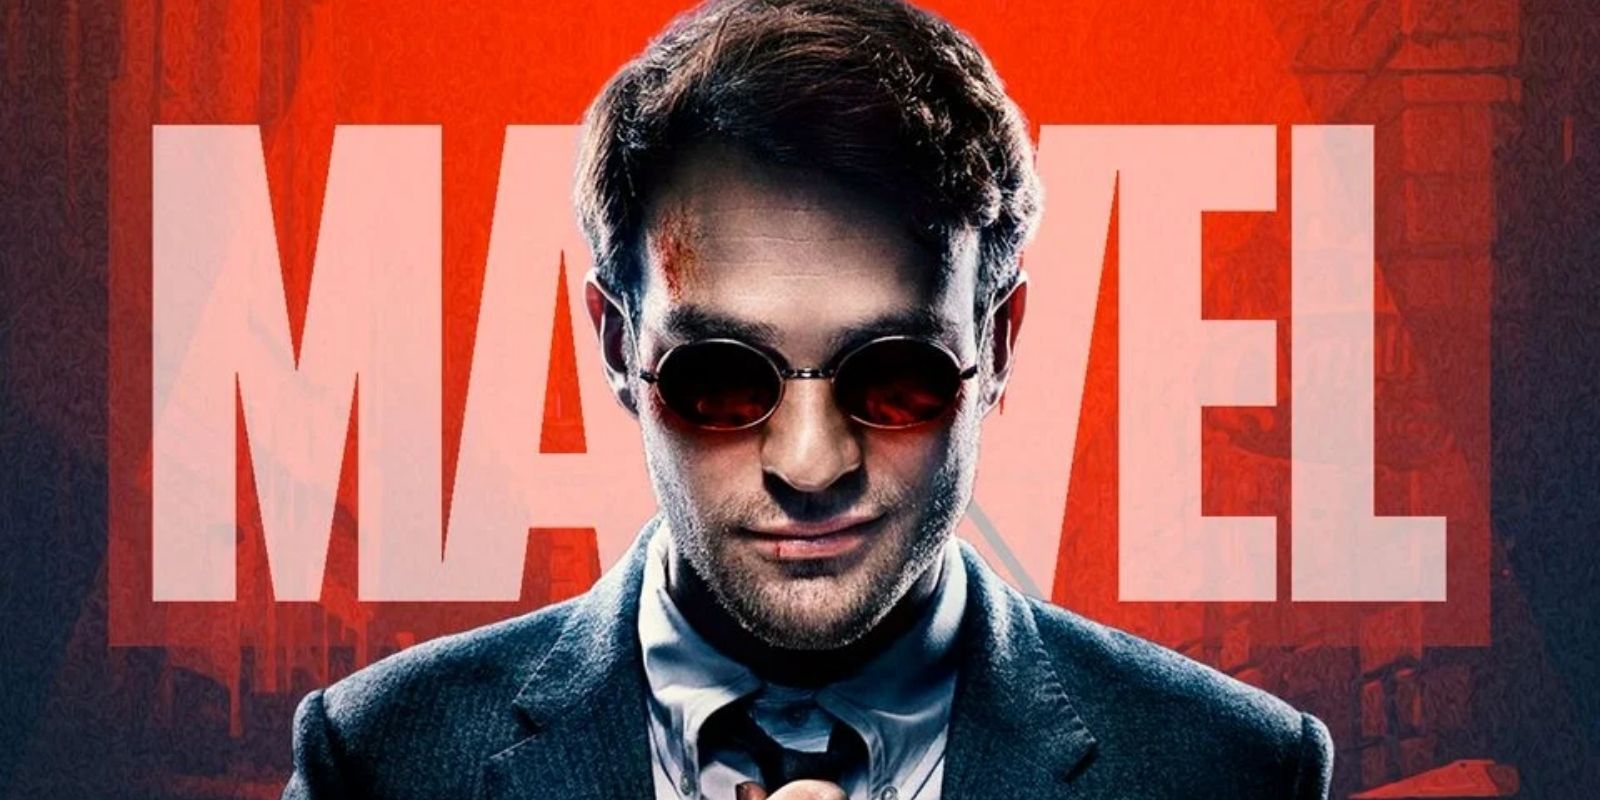 Charlie Cox's Daredevil stands in front of the Marvel logo